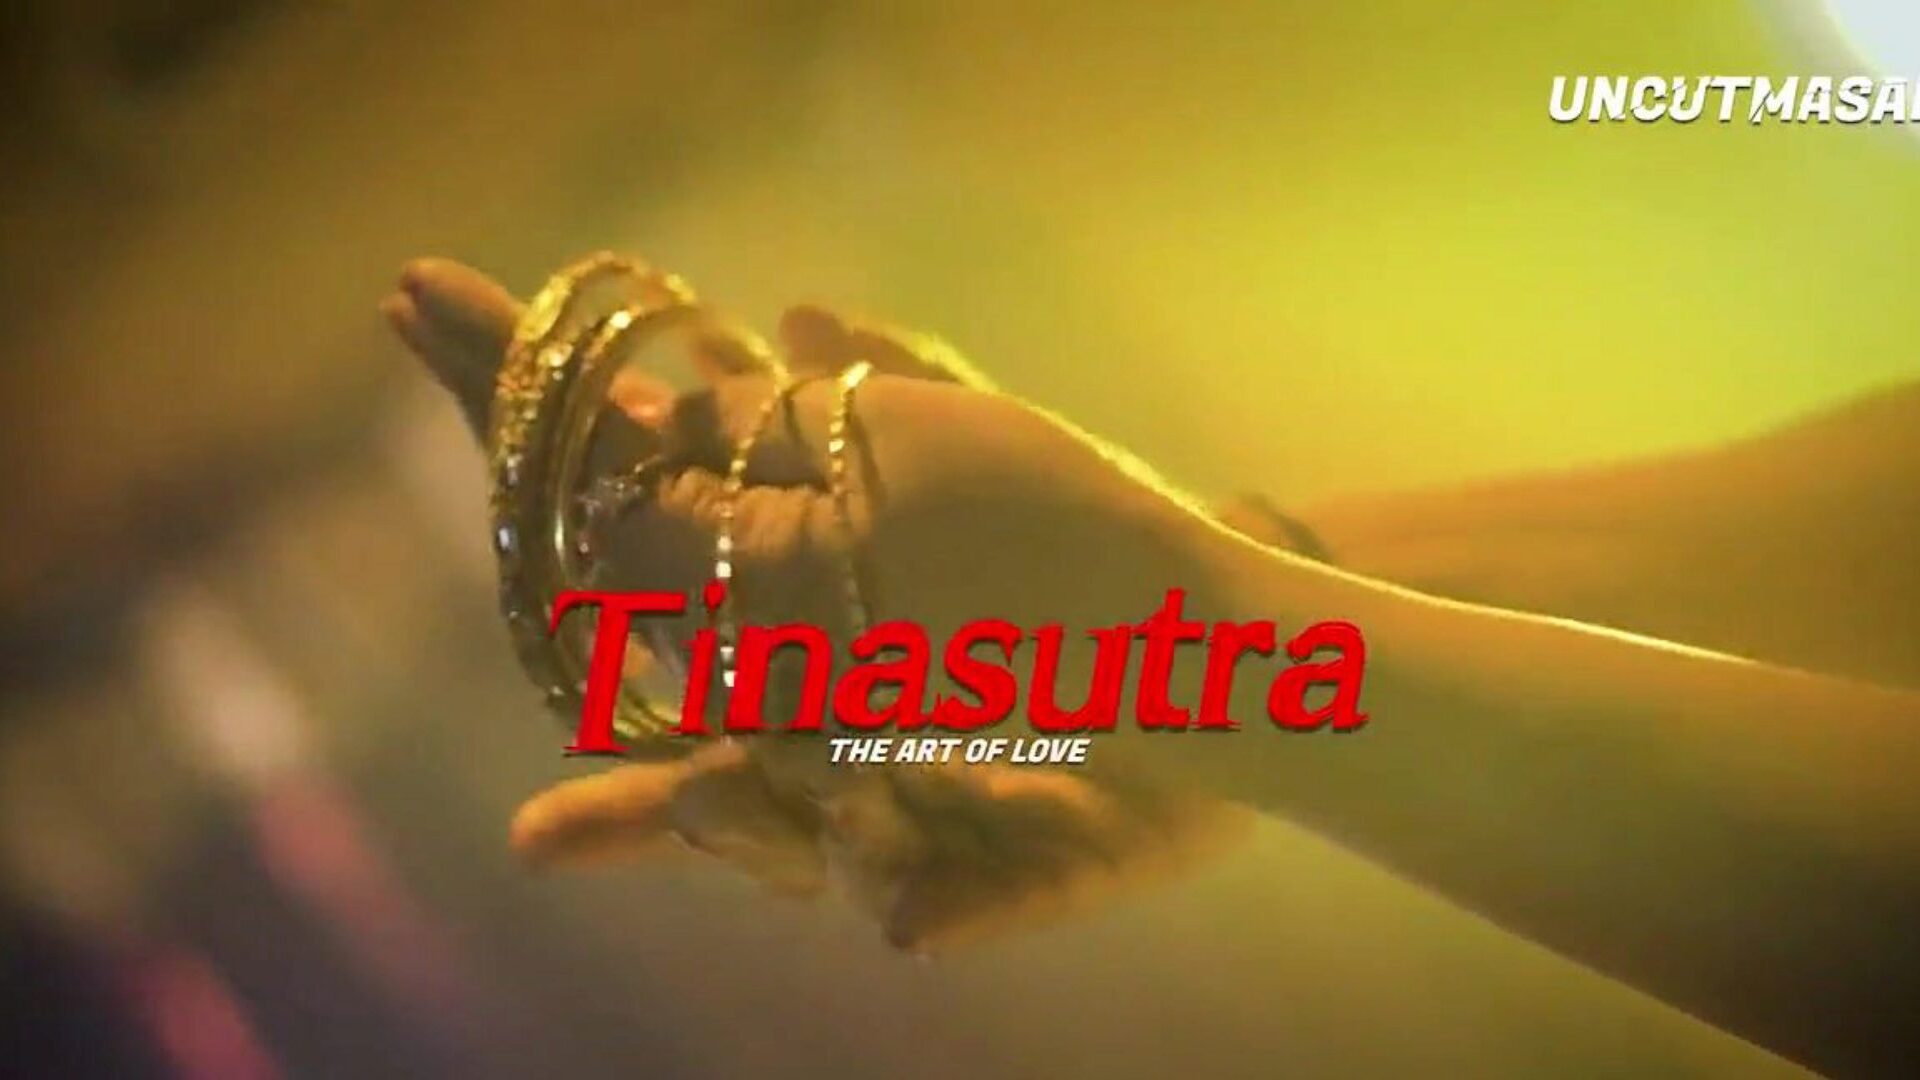 Tinasutra a Bengali Sex Story, Free Indian HD Porn b9 Watch Tinasutra a Bengali Sex Story clip on xHamster, the most good HD fuck-a-thon tube website with tons of free-for-all Asian Indian & Free Bengali pornography videos